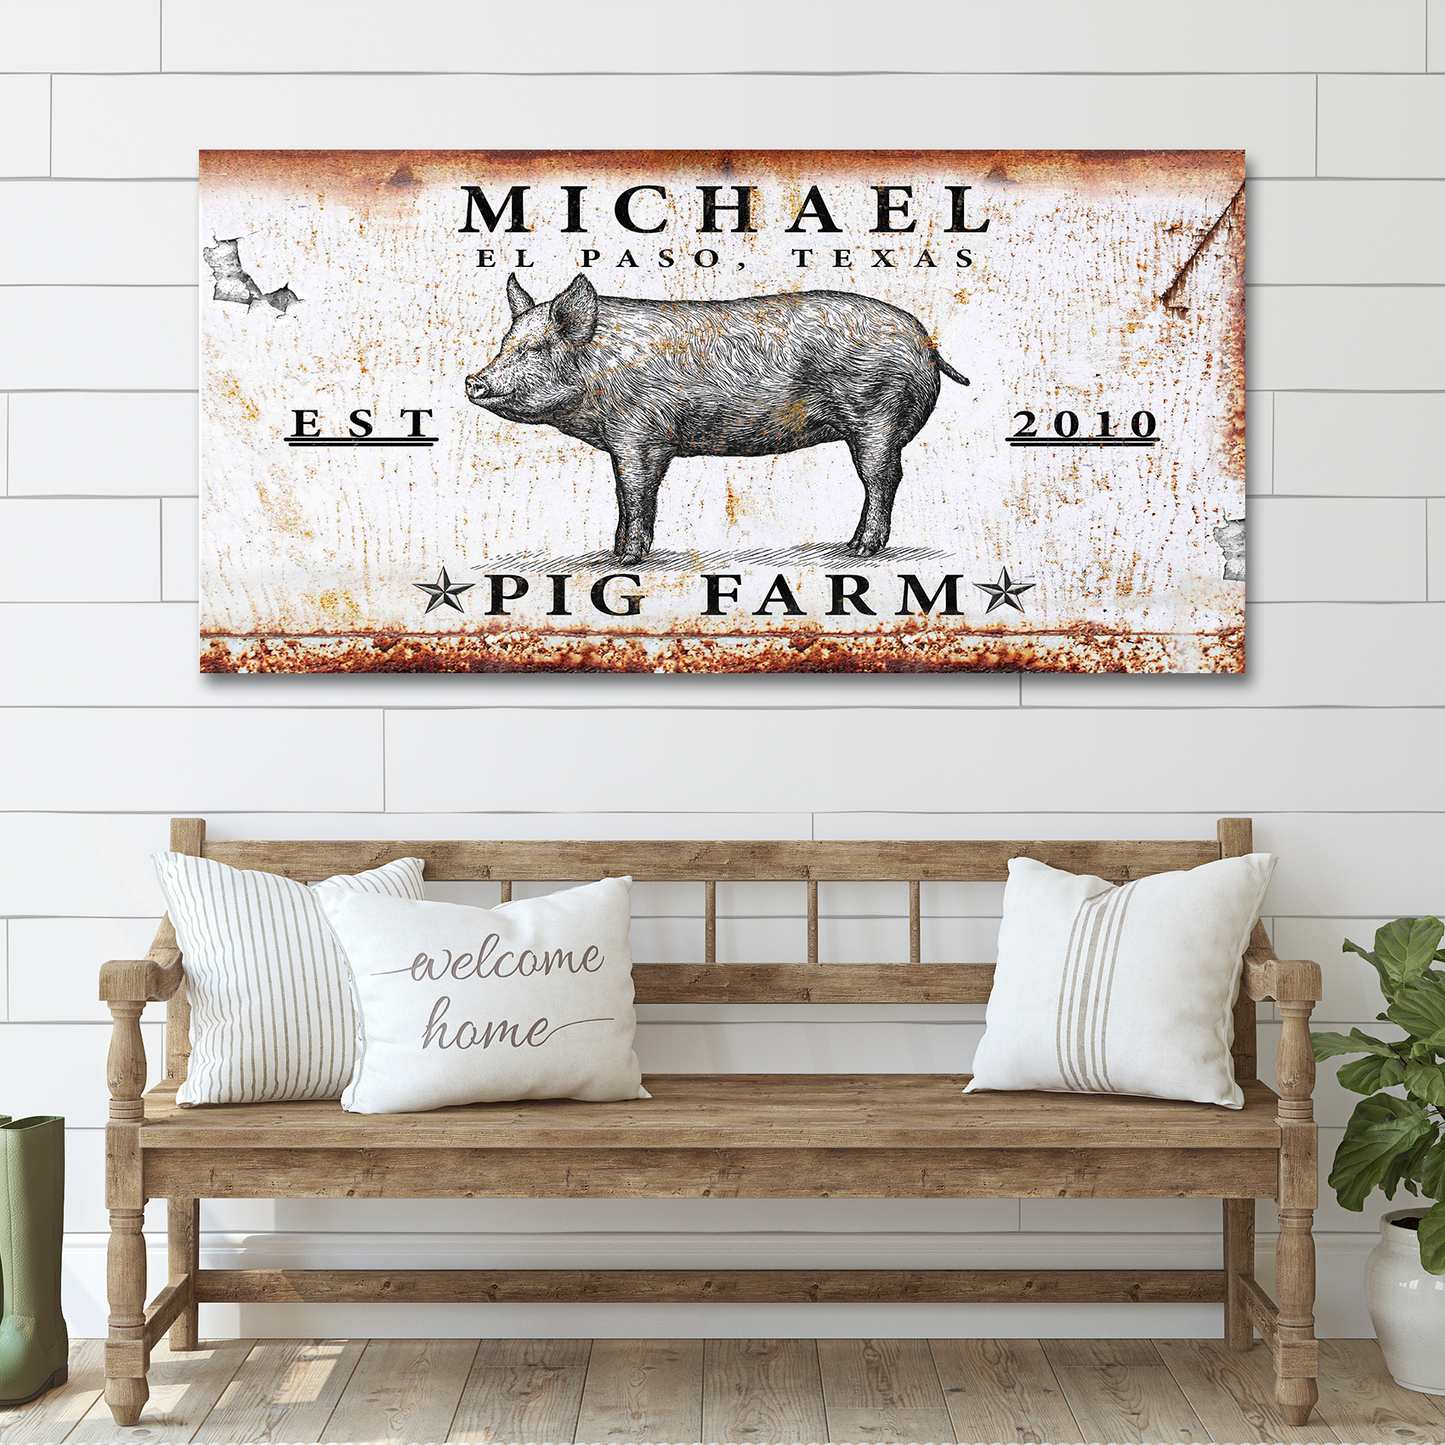 Pig Farm Sign - Image by Tailored Canvases